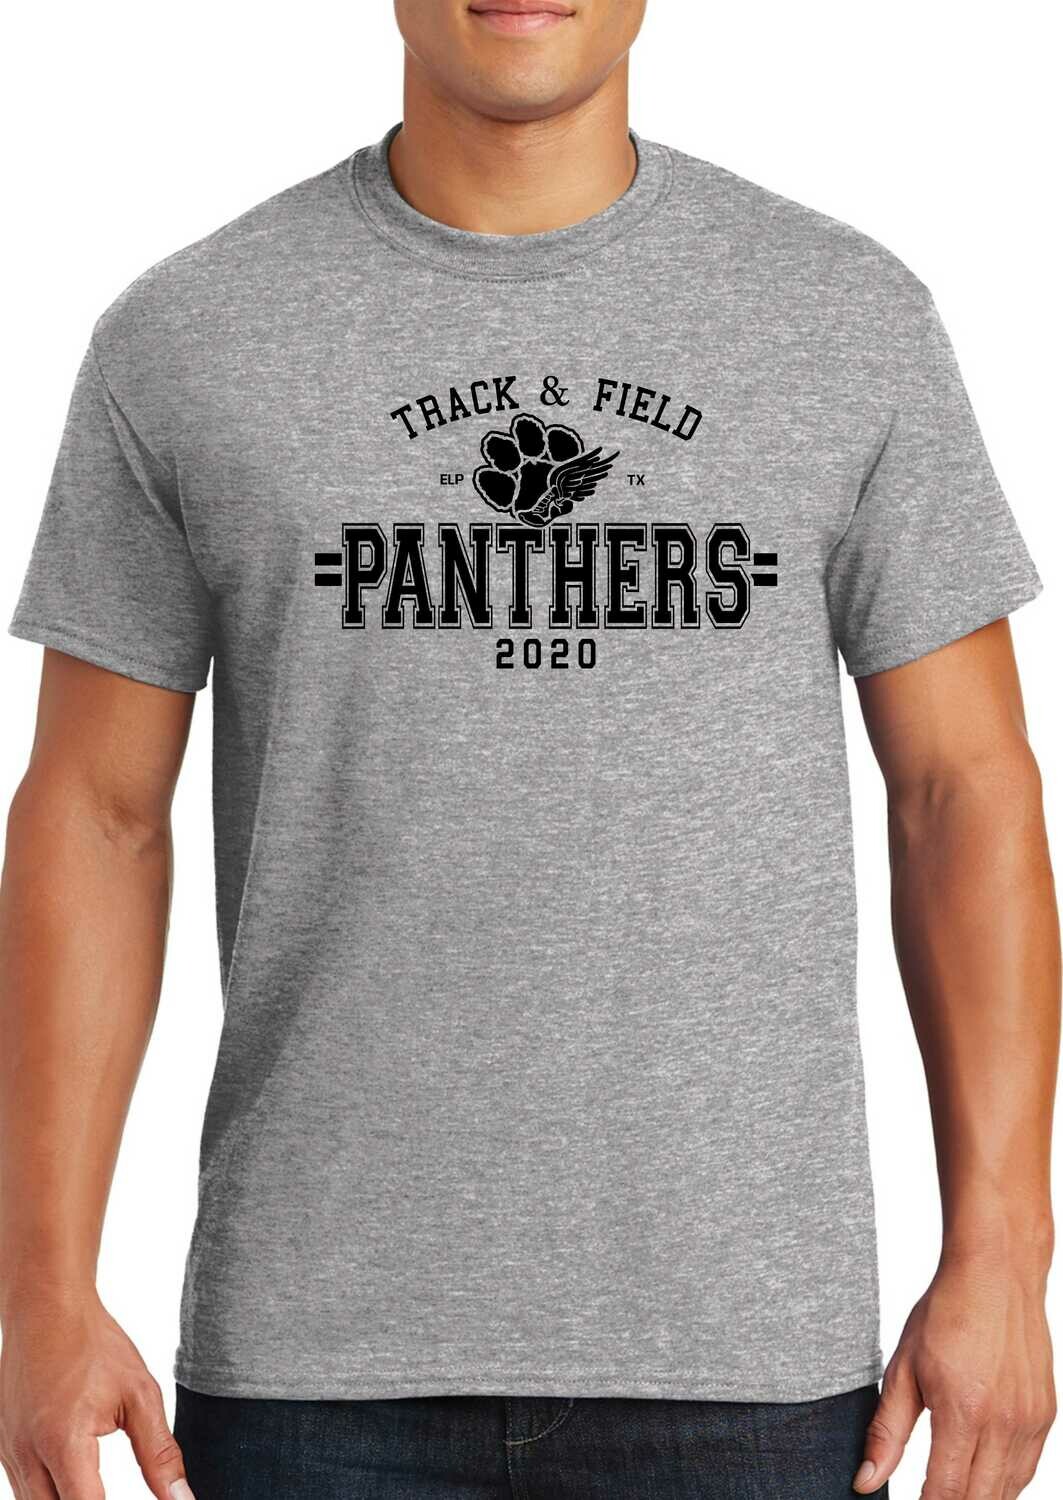 Panthers Running club T